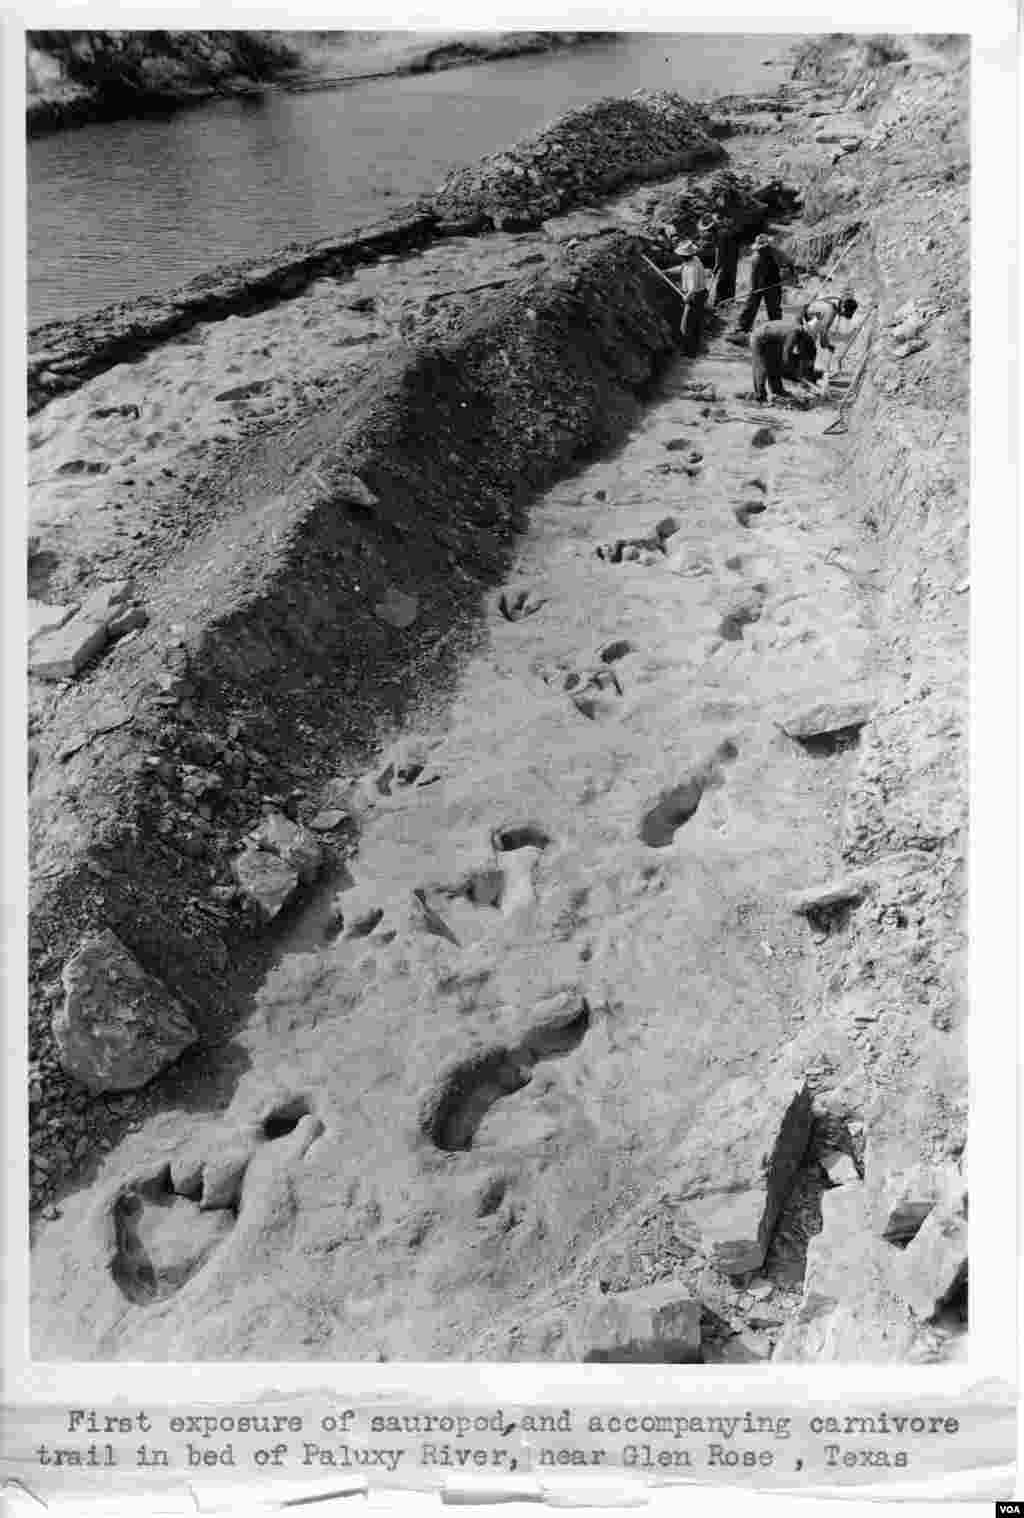 Footprints in the mud from more than 100 million years ago are the tracks of the three-toed theropod (left) and the broader-footed sauropod (right) in bed of Paluxy River, Texas. (R.T. Bird from the Collections of the Vertebrate Paleontology Laboratory, The University of Texas at Austin)